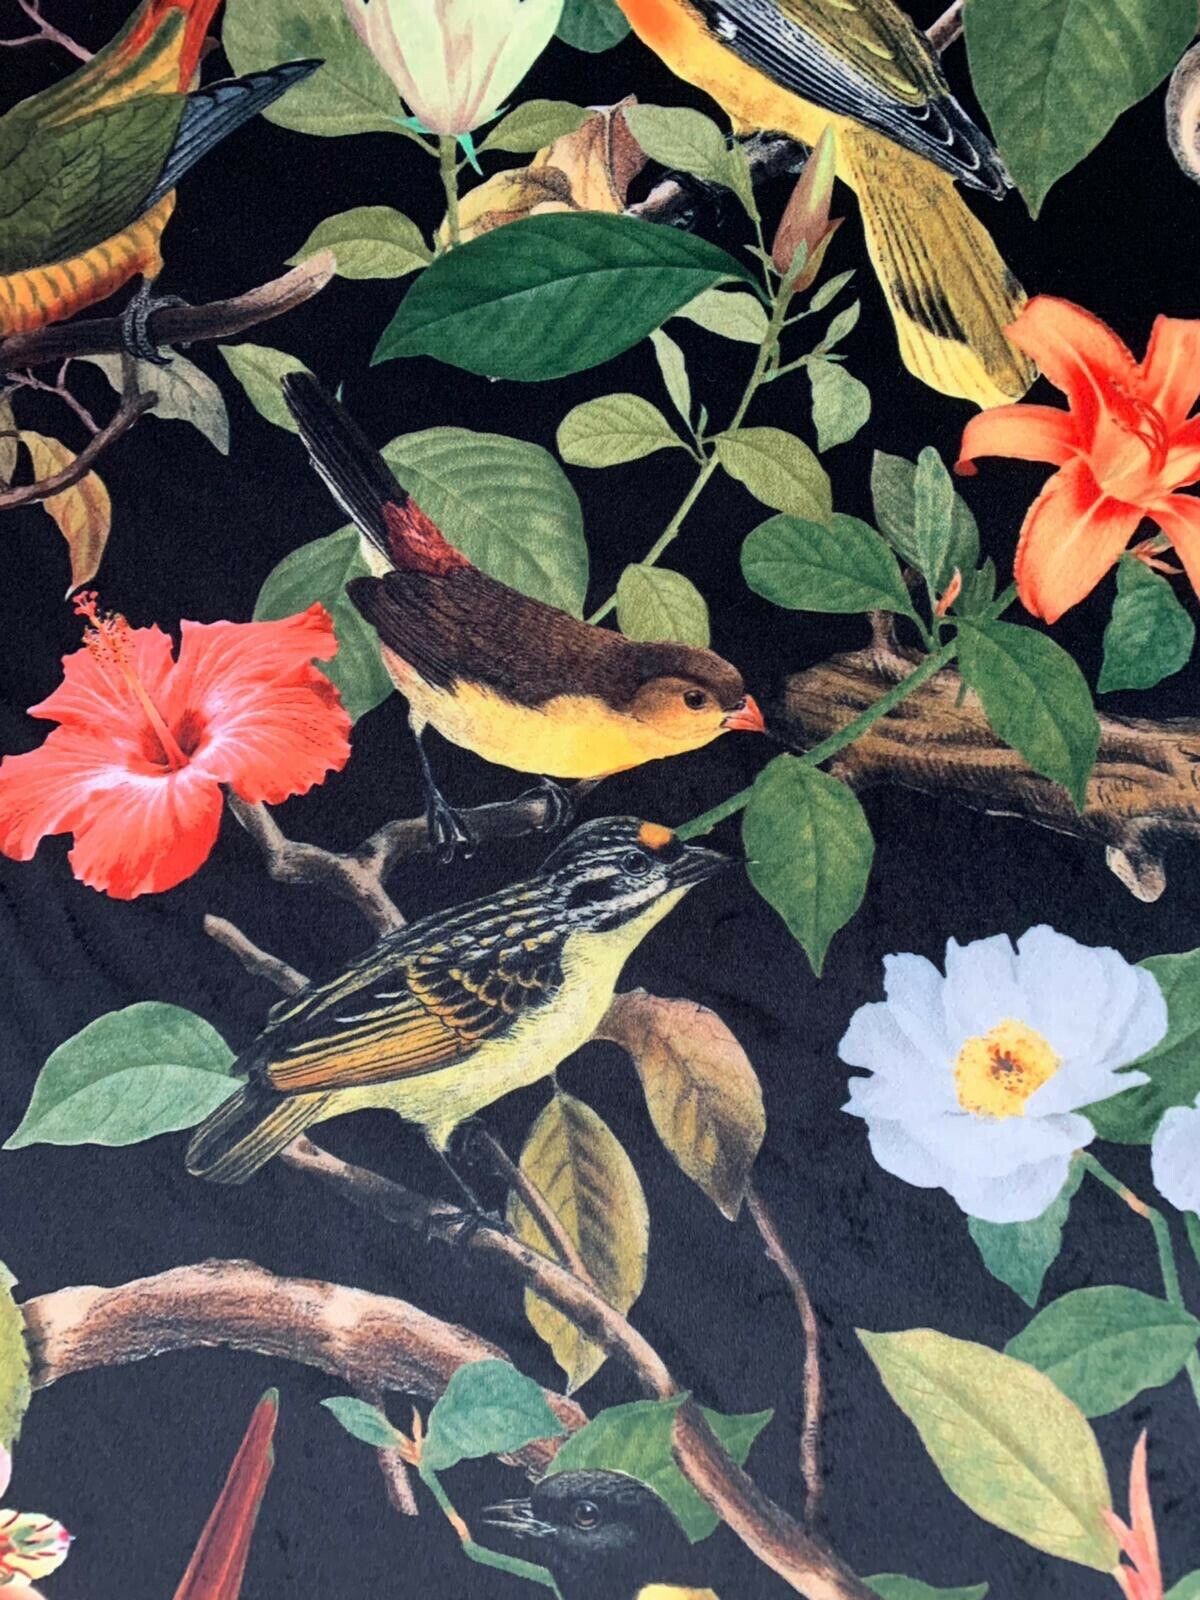 Hibiscus And Lilies Black Fabric By Meter Birds Sewing Material Floral Velvet Bird Pattern Green Botanical Textile